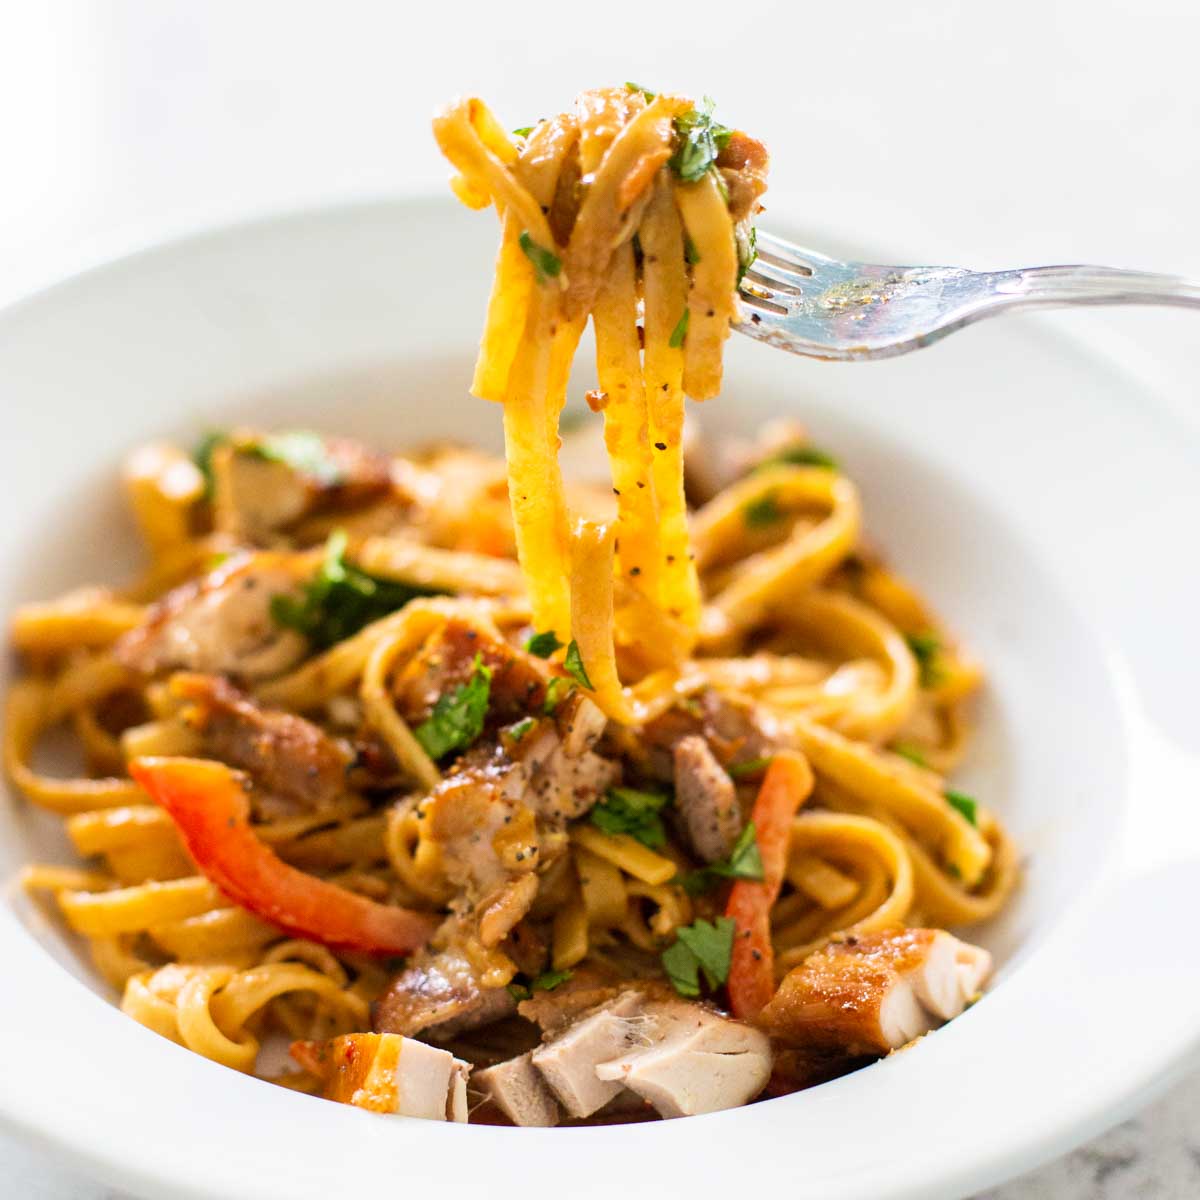 A bowl of peanut butter pasta has a fork pulling up the noodles to show the sauce and veggies.